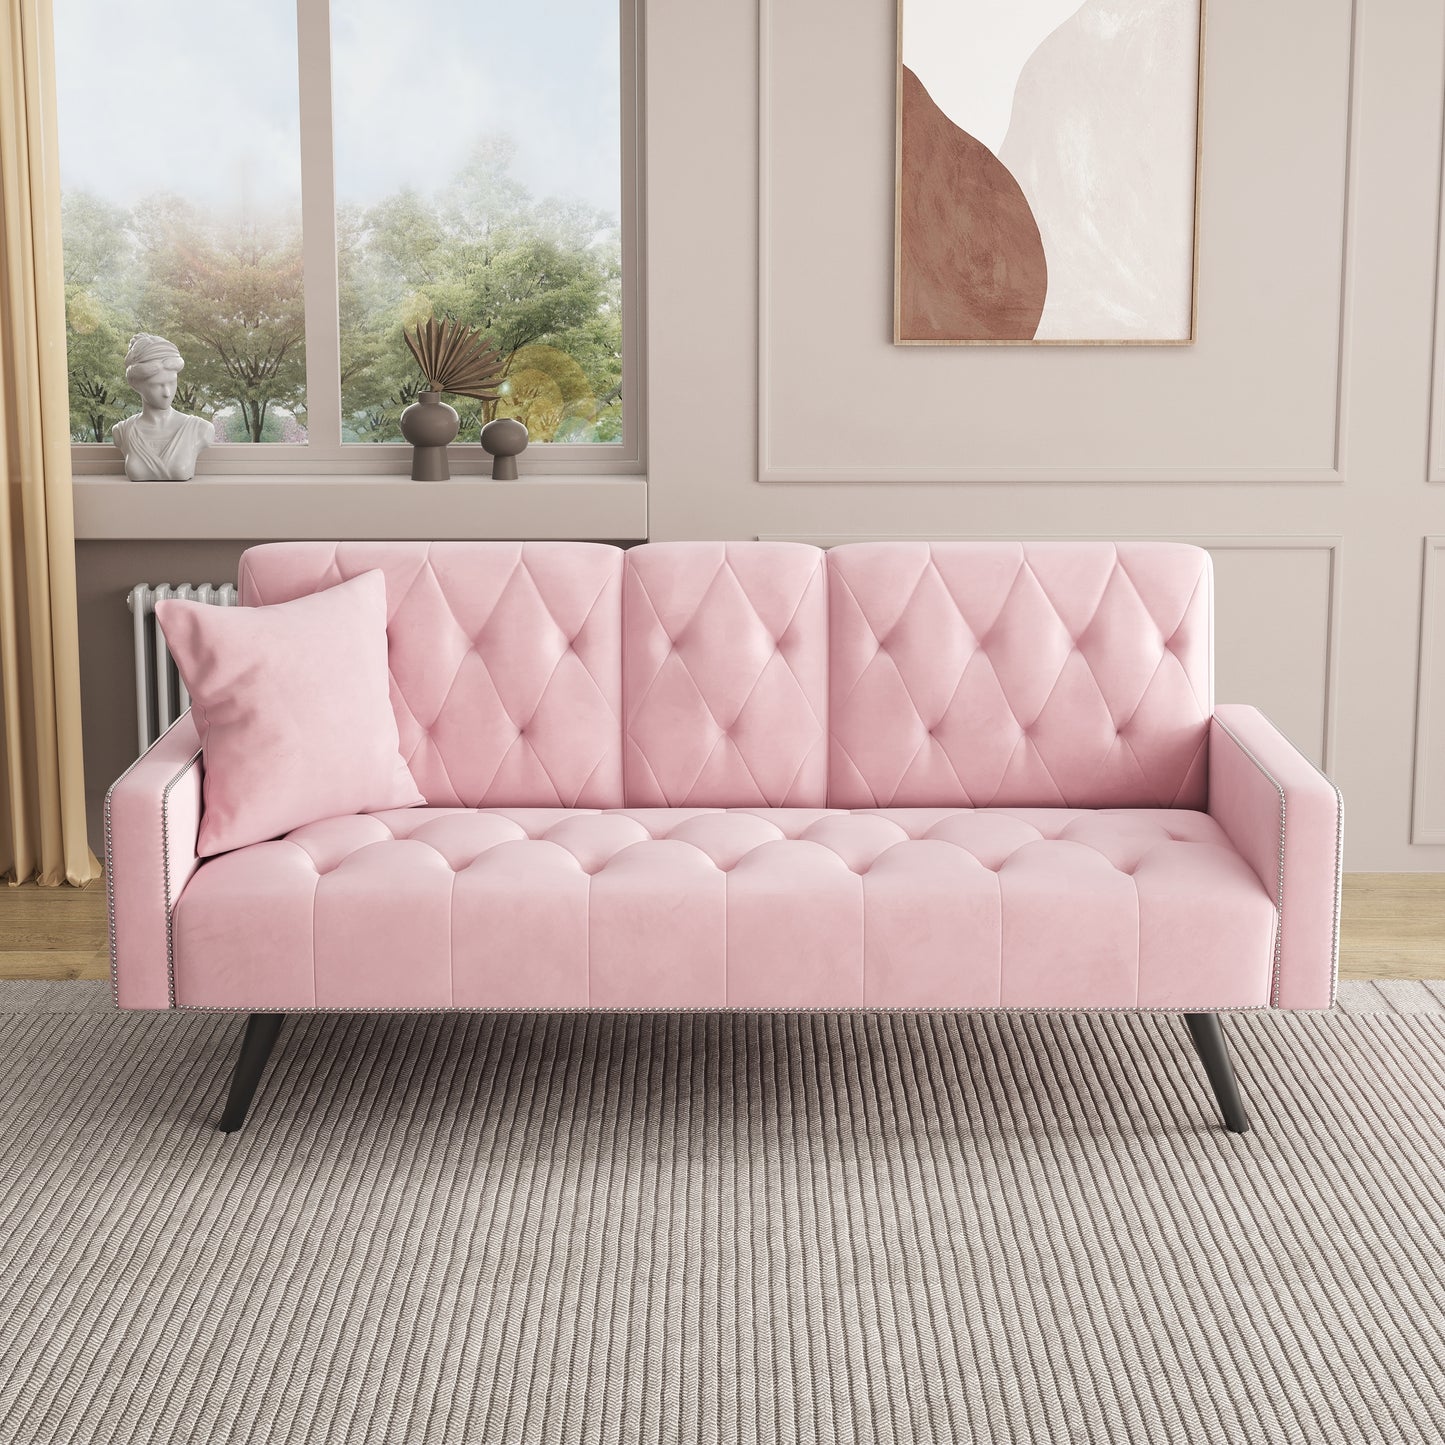 1730 Sofa Bed Armrest with Nail Head Trim with Two Cup Holders 72" Pink Velvet Sofa for Small Spaces